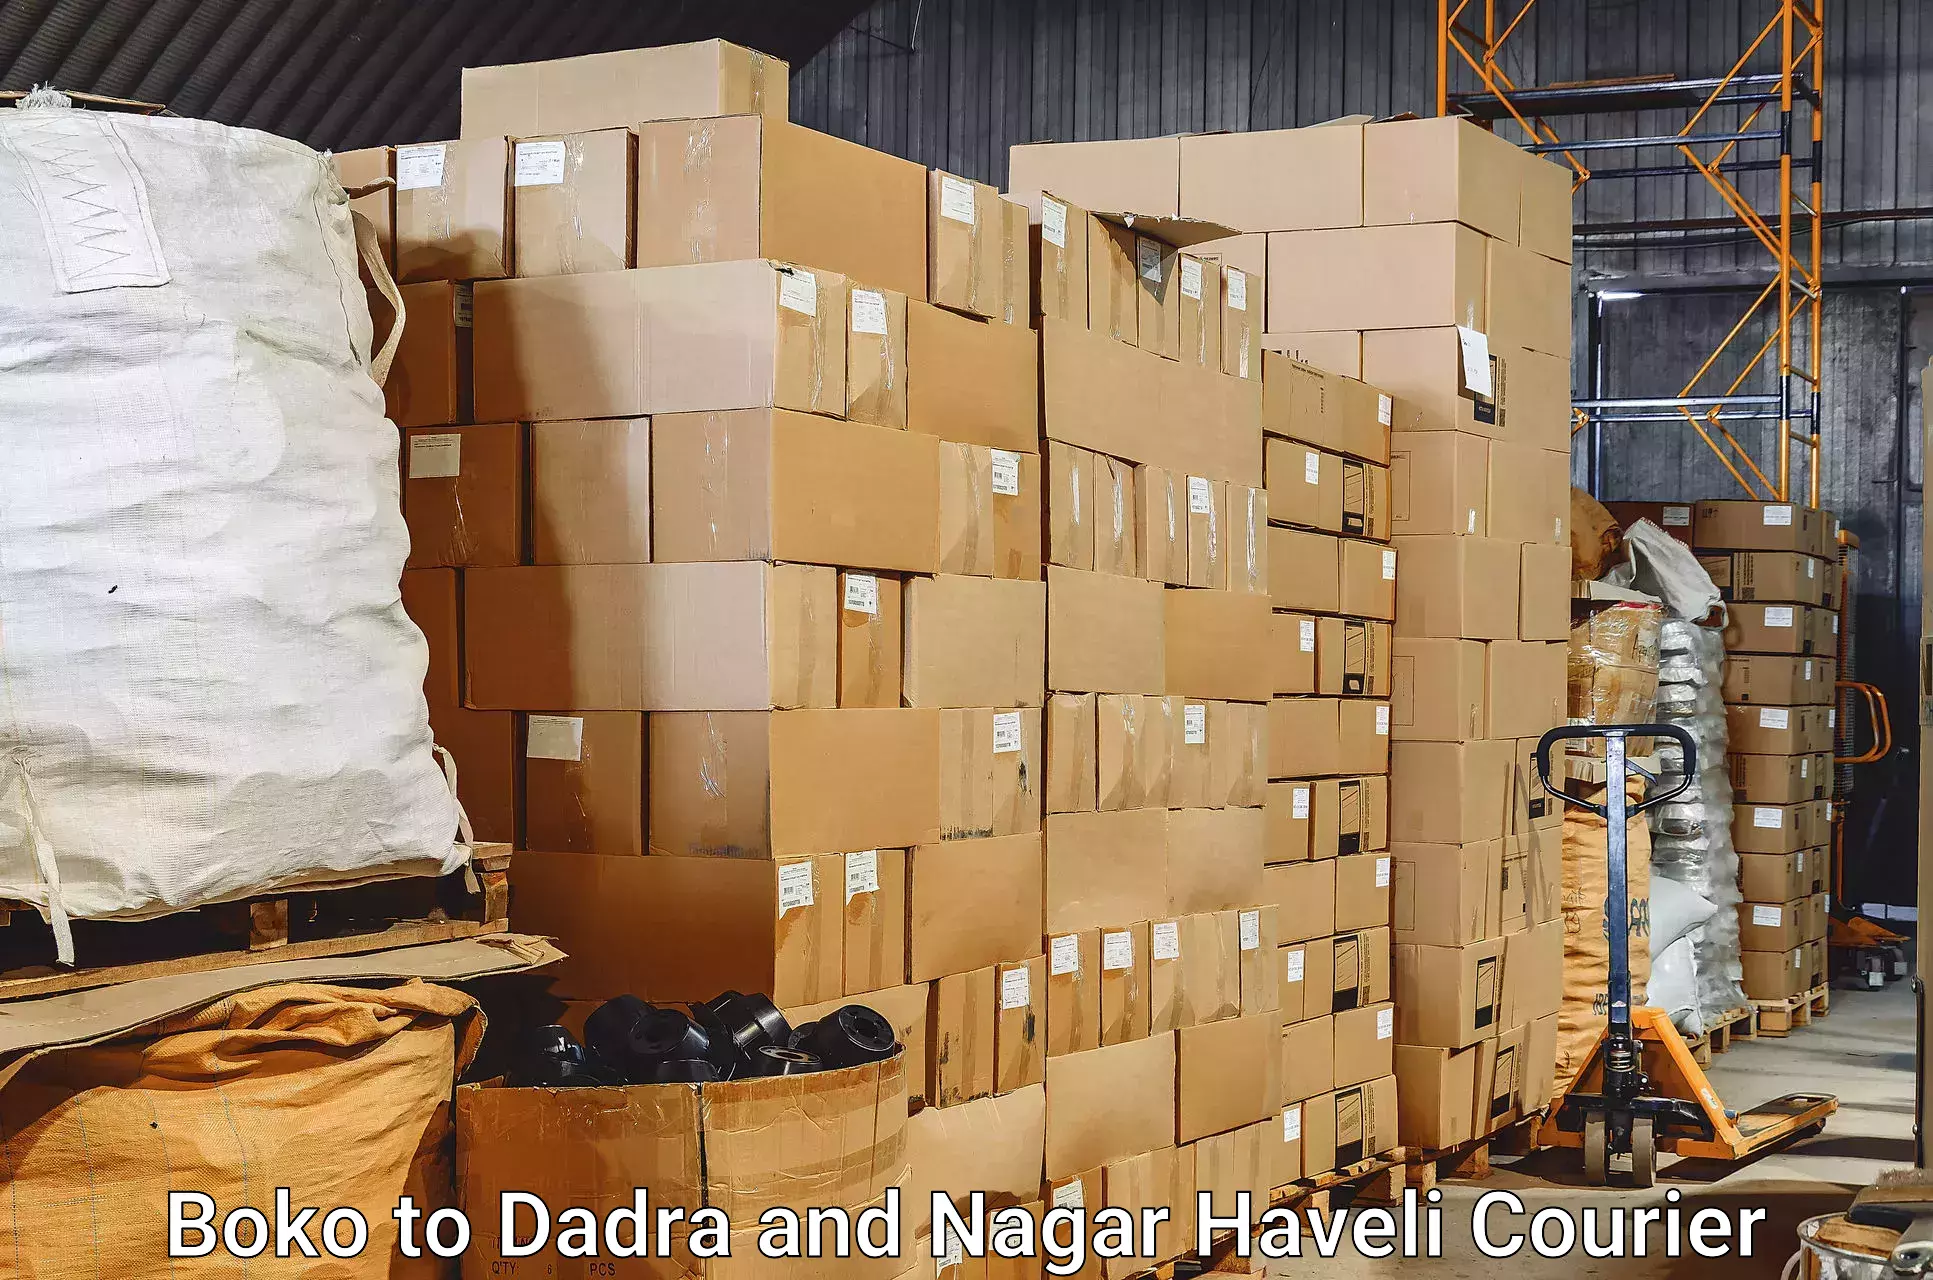 Luggage shipping specialists Boko to Dadra and Nagar Haveli